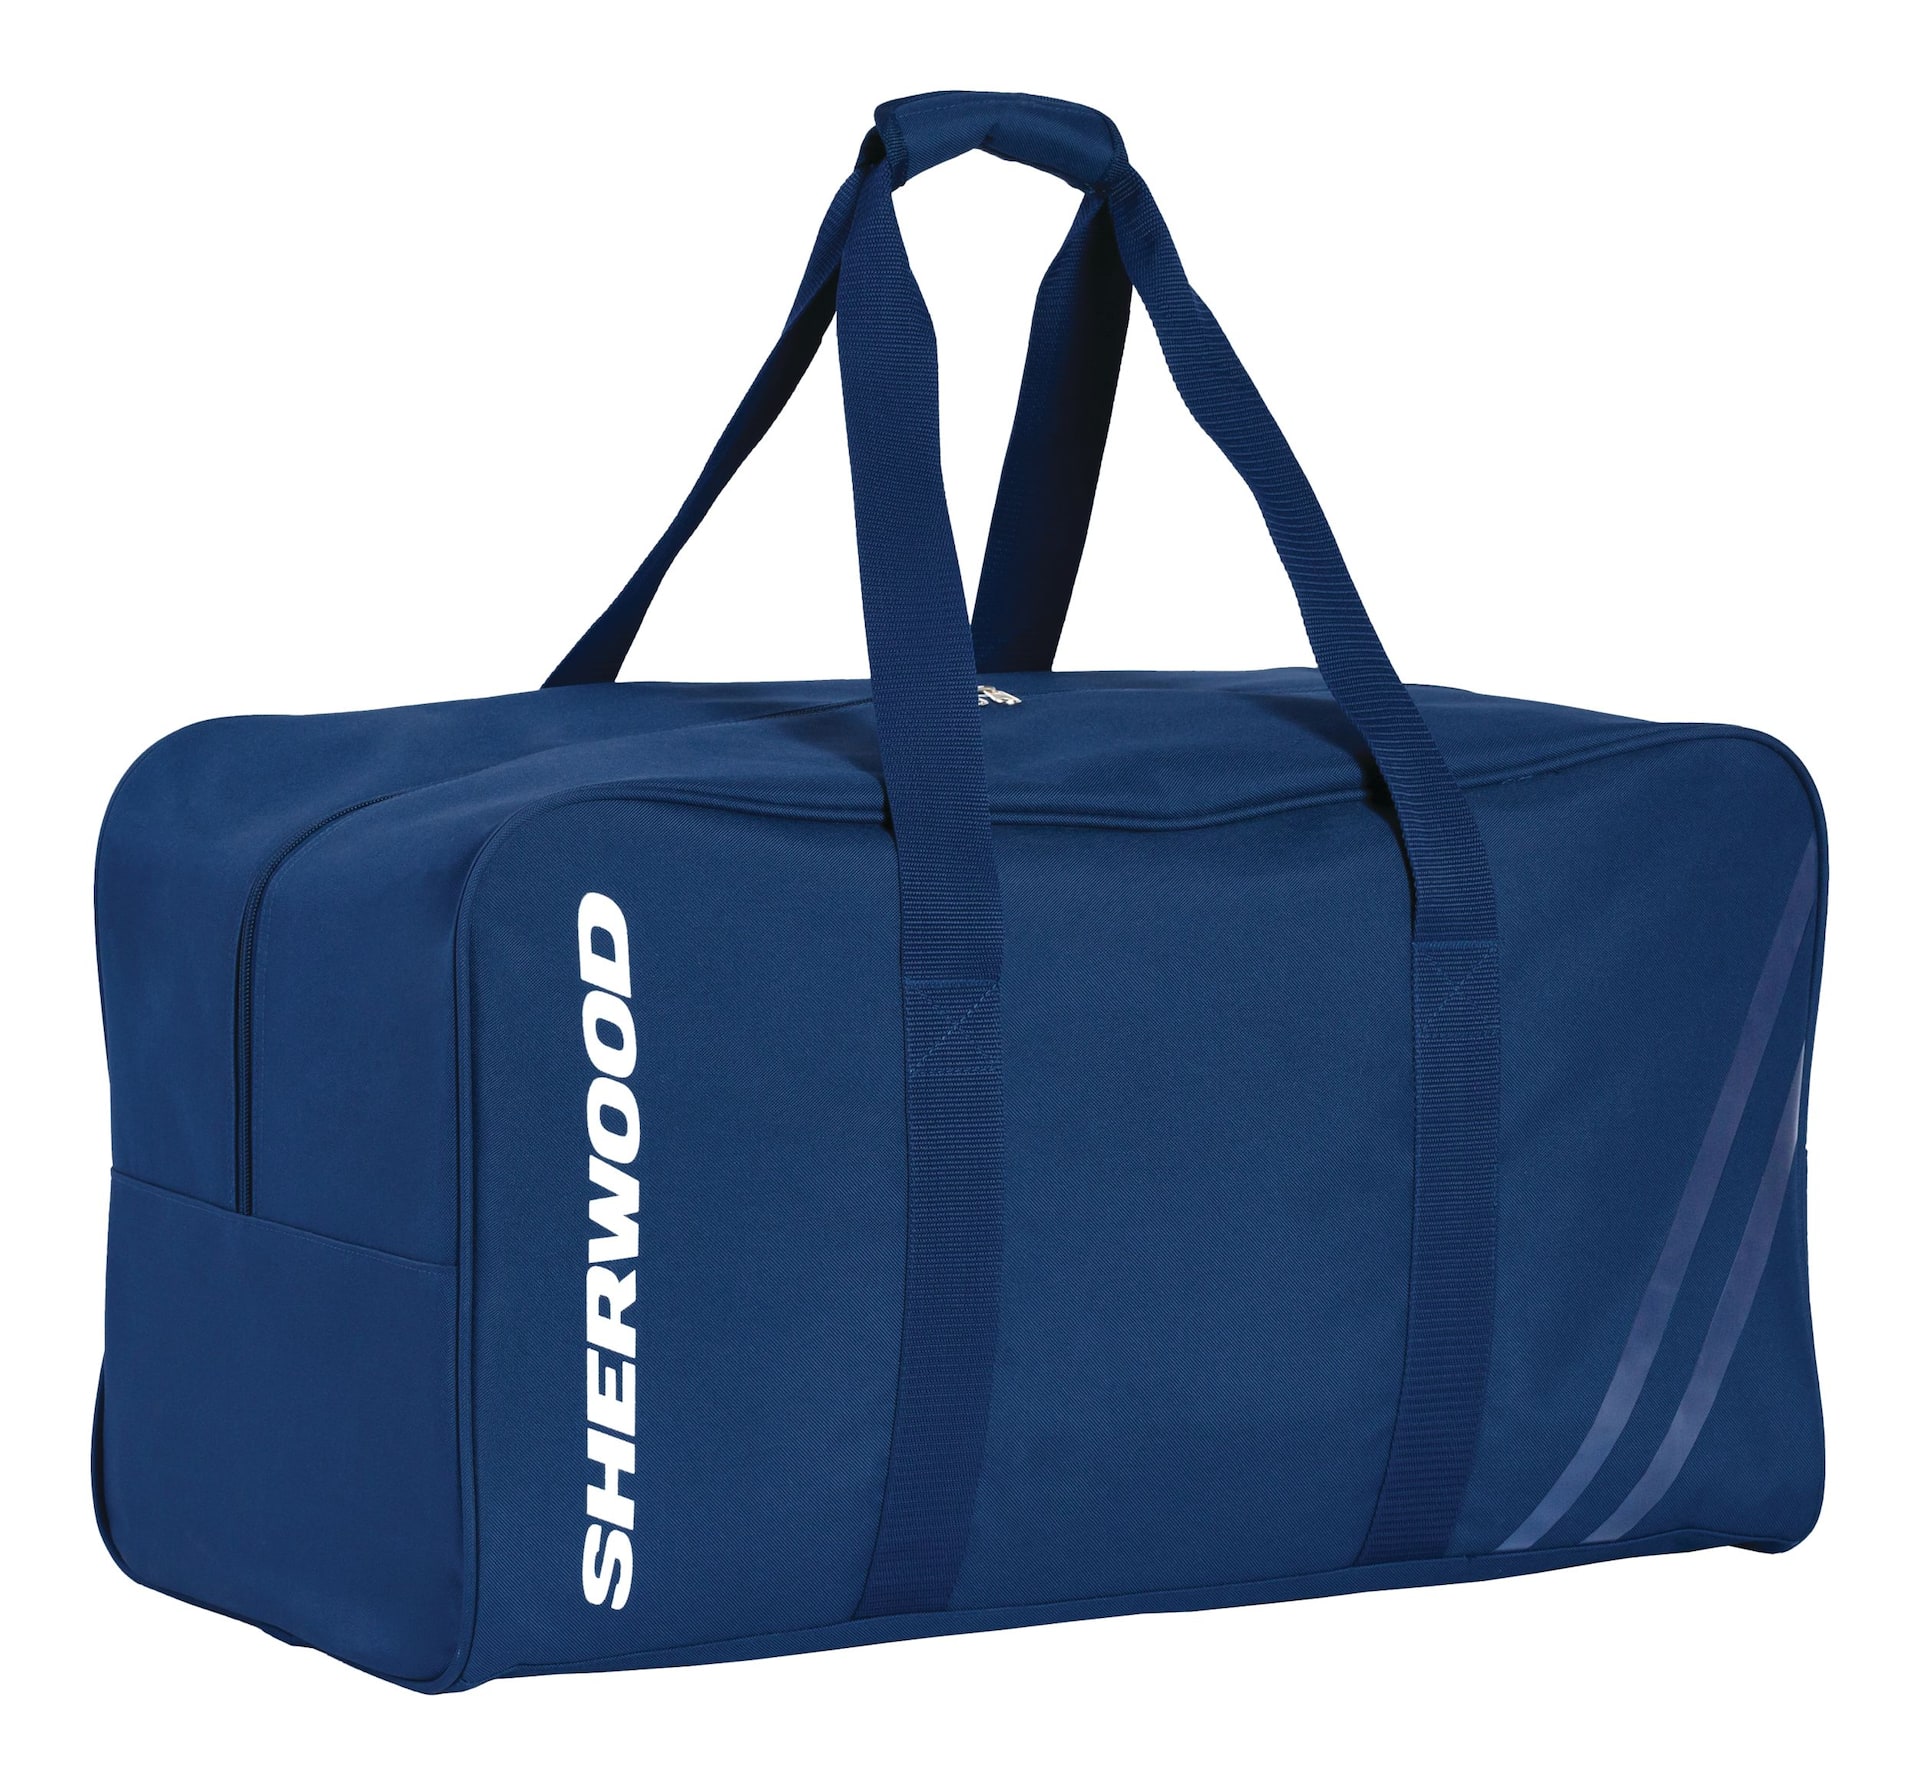 Sherwood Hockey Bag, Carry, Youth, Blue, 26-in